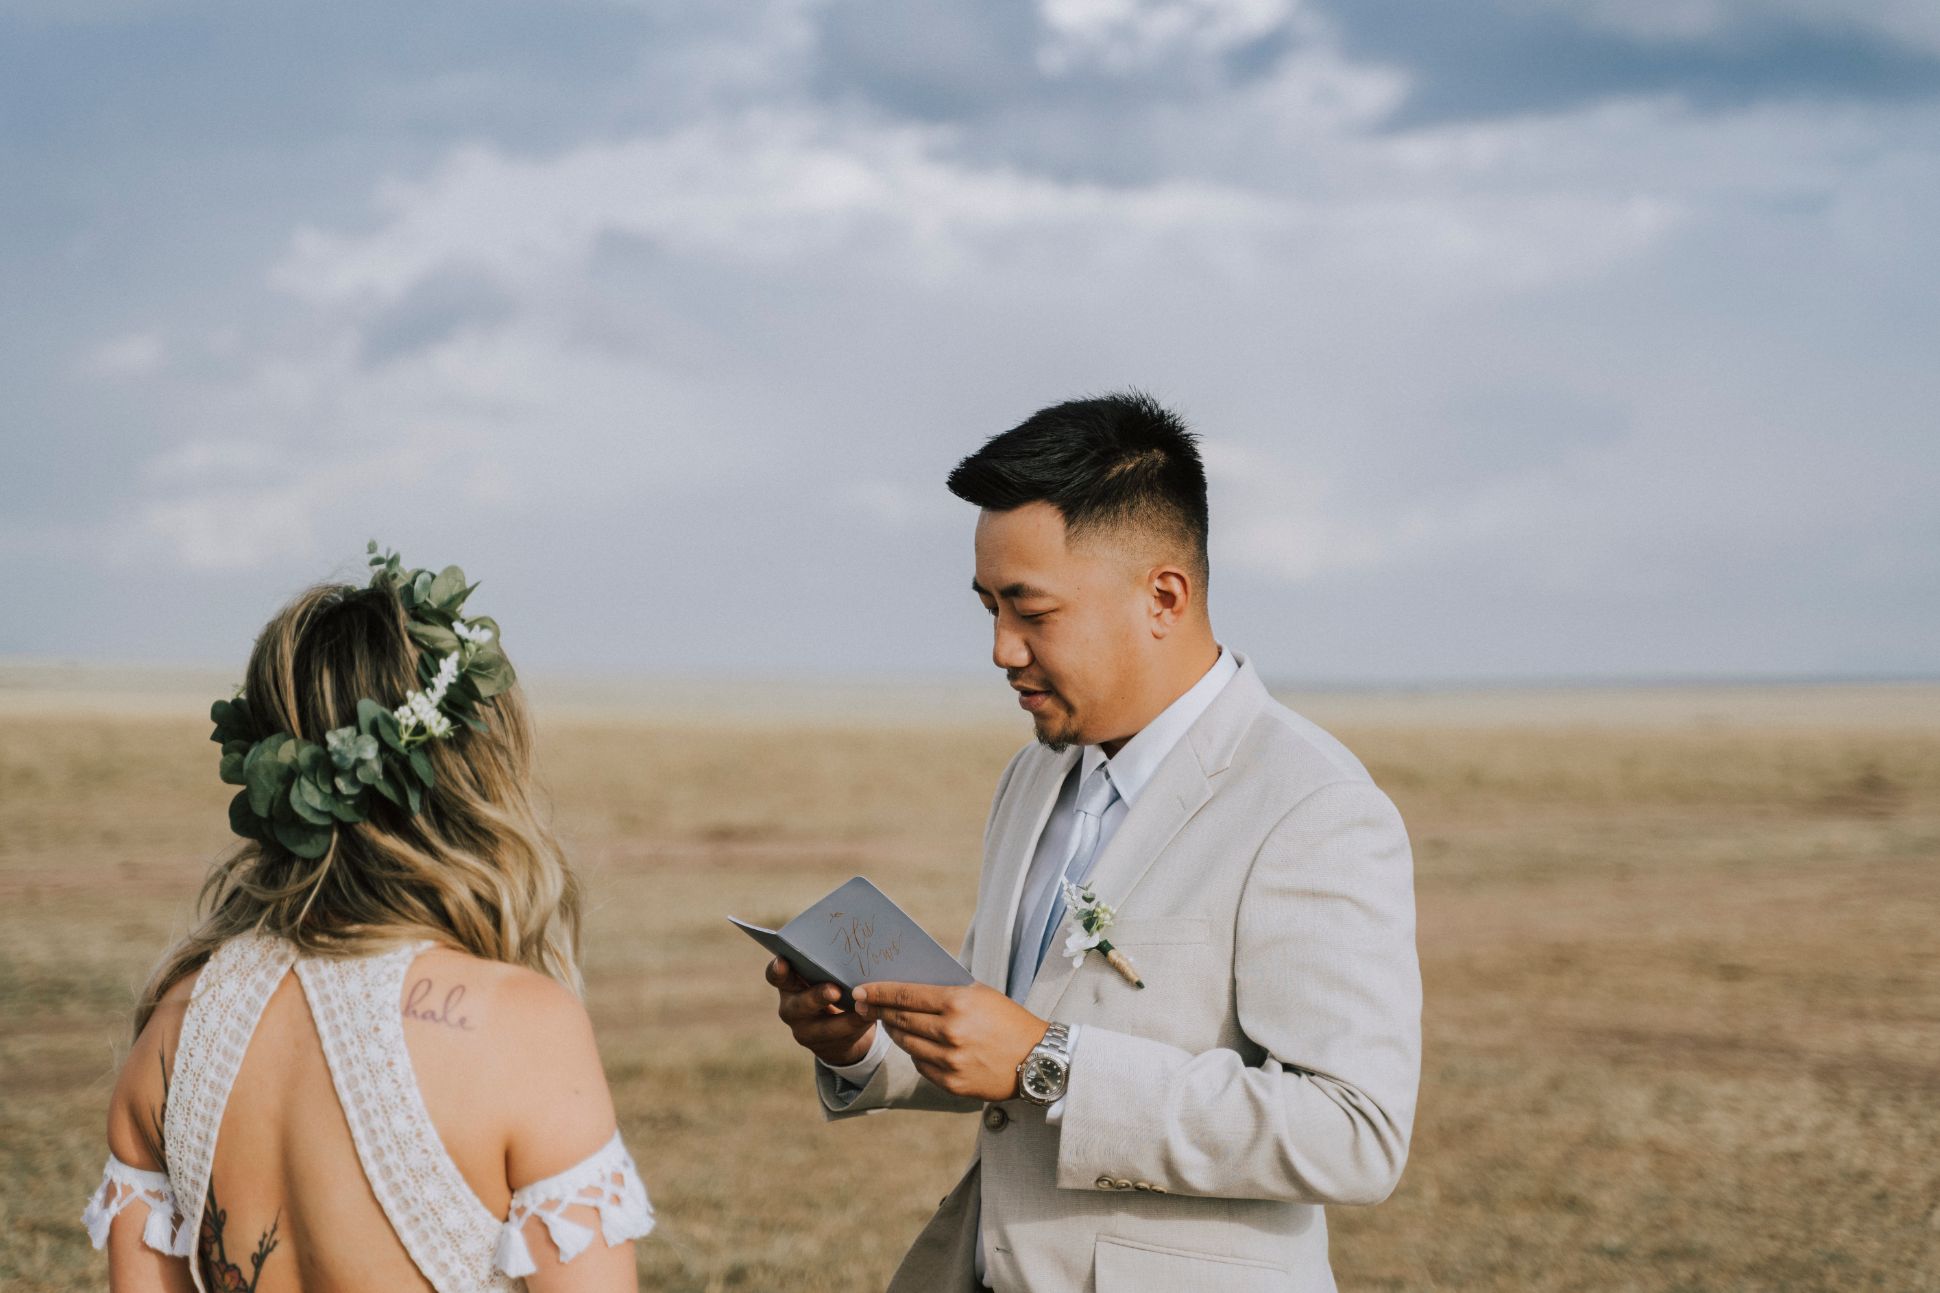 Groom shares vows with bride